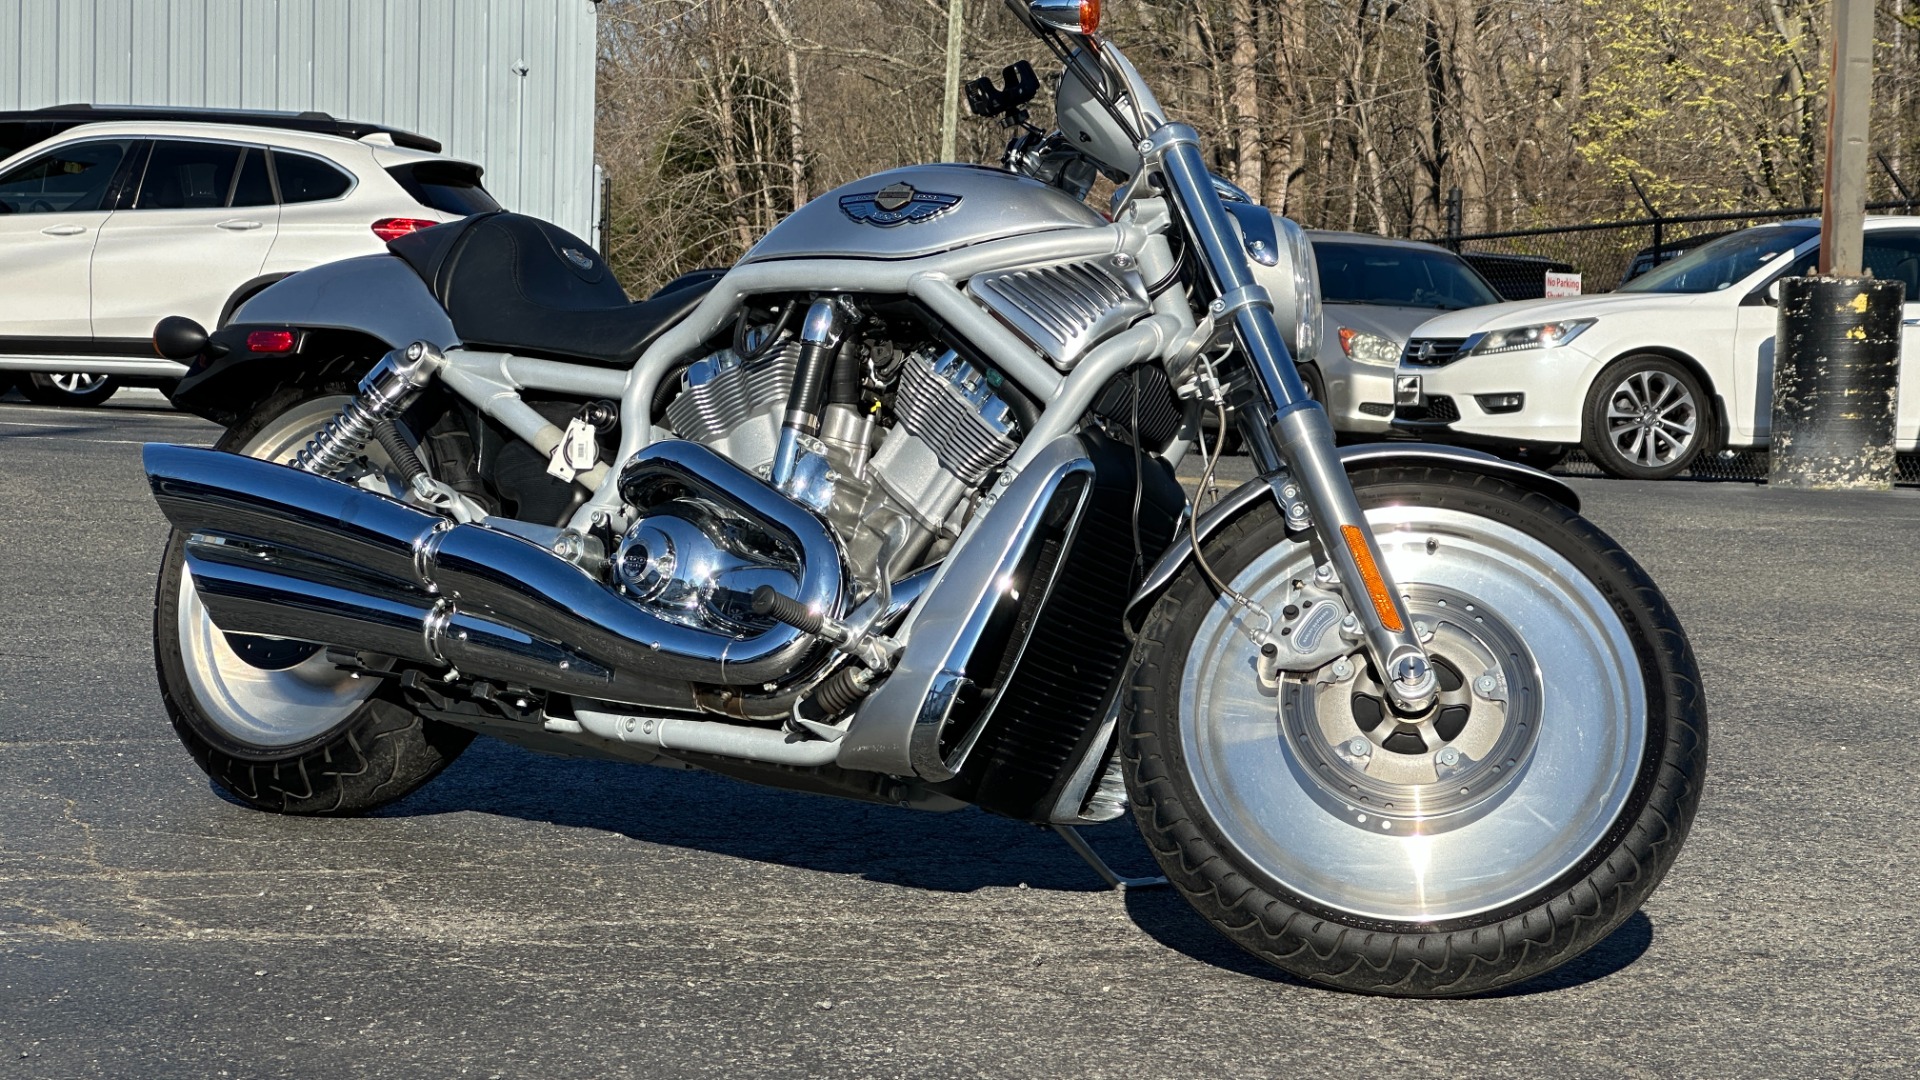 Used 2003 Harley Davidson V Rod ANNIVERSARY EDITION / 1130CC ENGINE / BREMBO BRAKES / VORTEX AIR SCOOPS for sale $7,695 at Formula Imports in Charlotte NC 28227 60